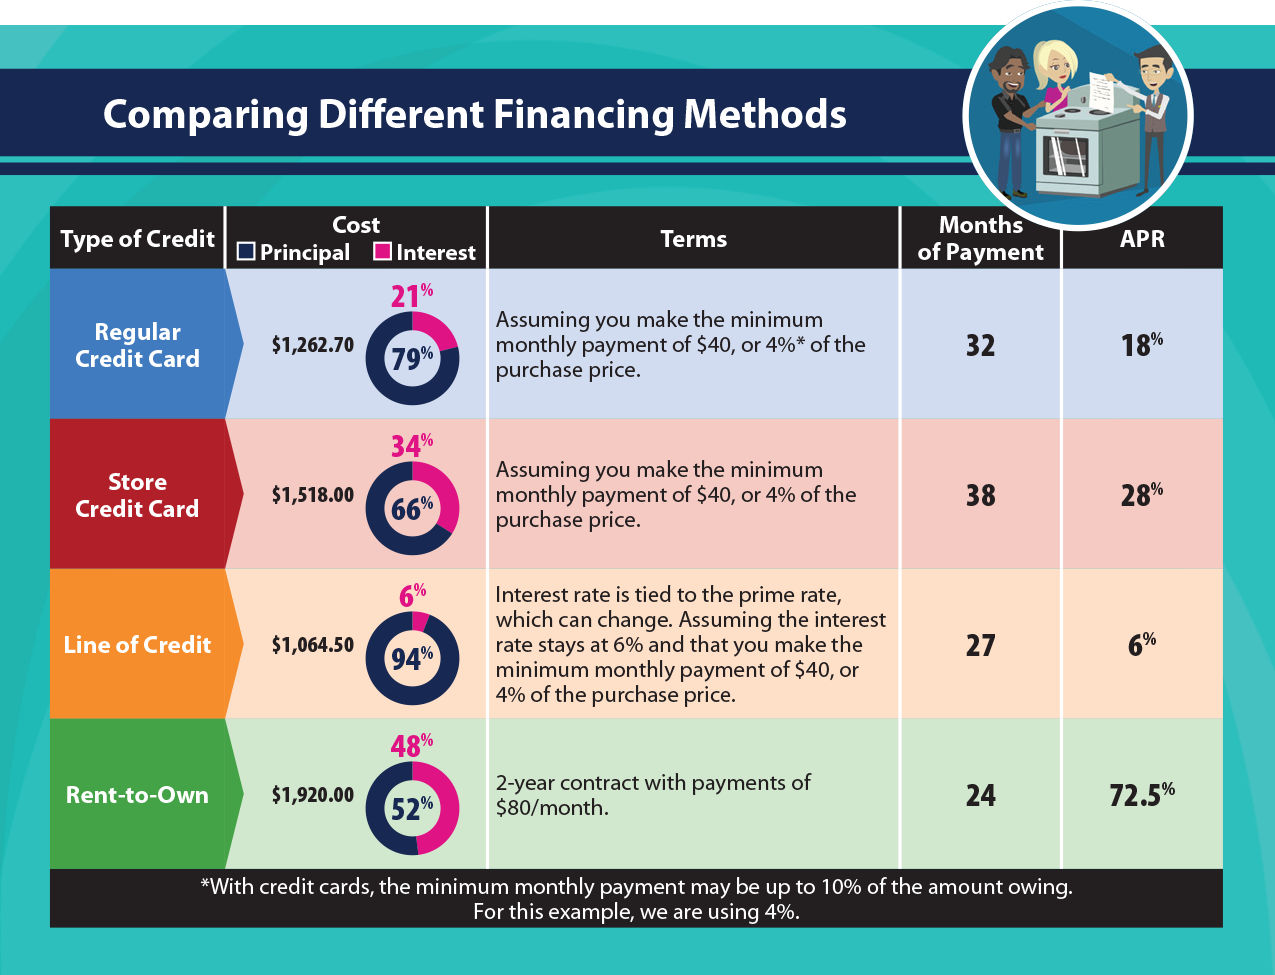 Comparing different financing methods